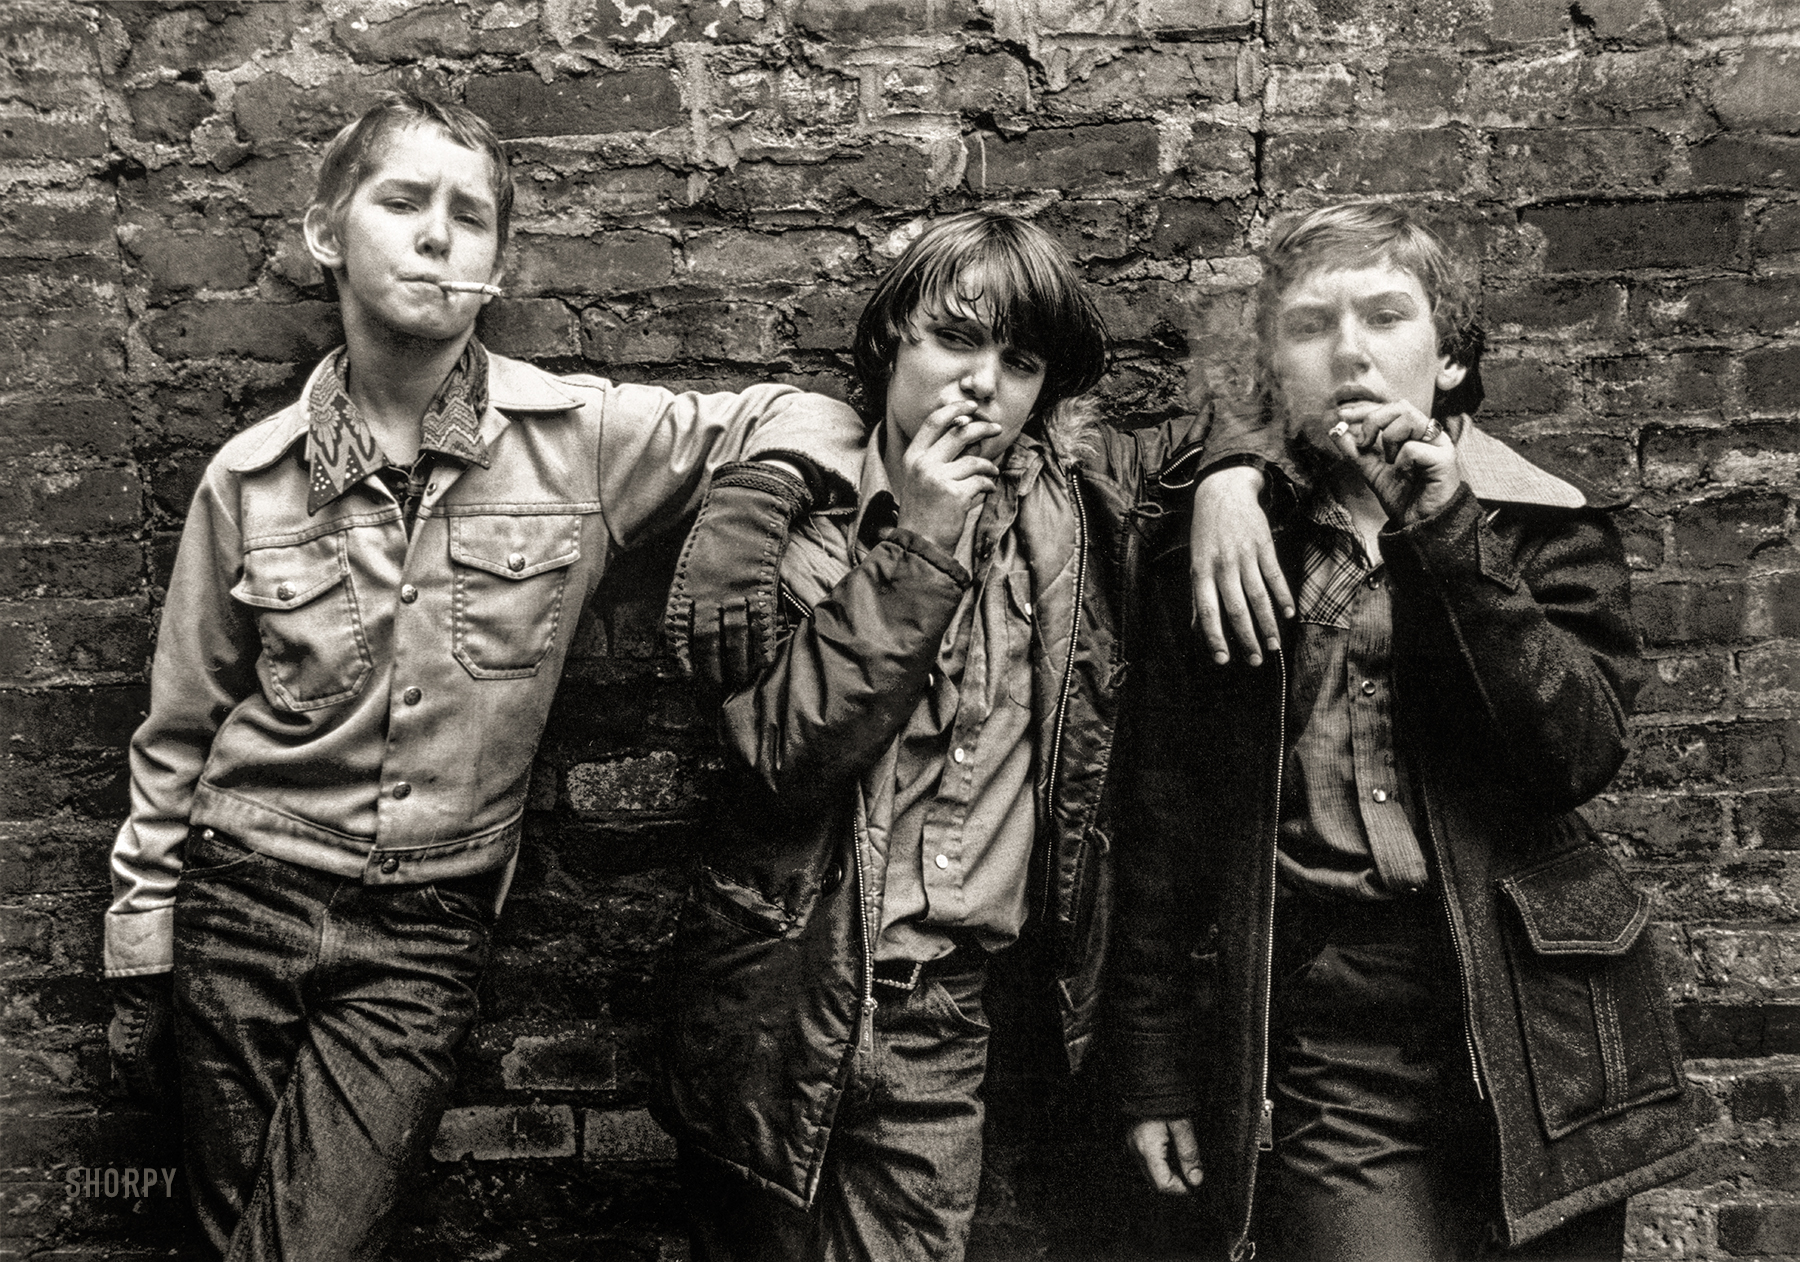 New York City, 1975. "Three boys with tough expressions smoking cigarettes." Compare with Lewis Hine's photo Skeeter's Branch Newsies, from 65 years earlier. Gelatin silver print by William J. Cunningham. View full size.